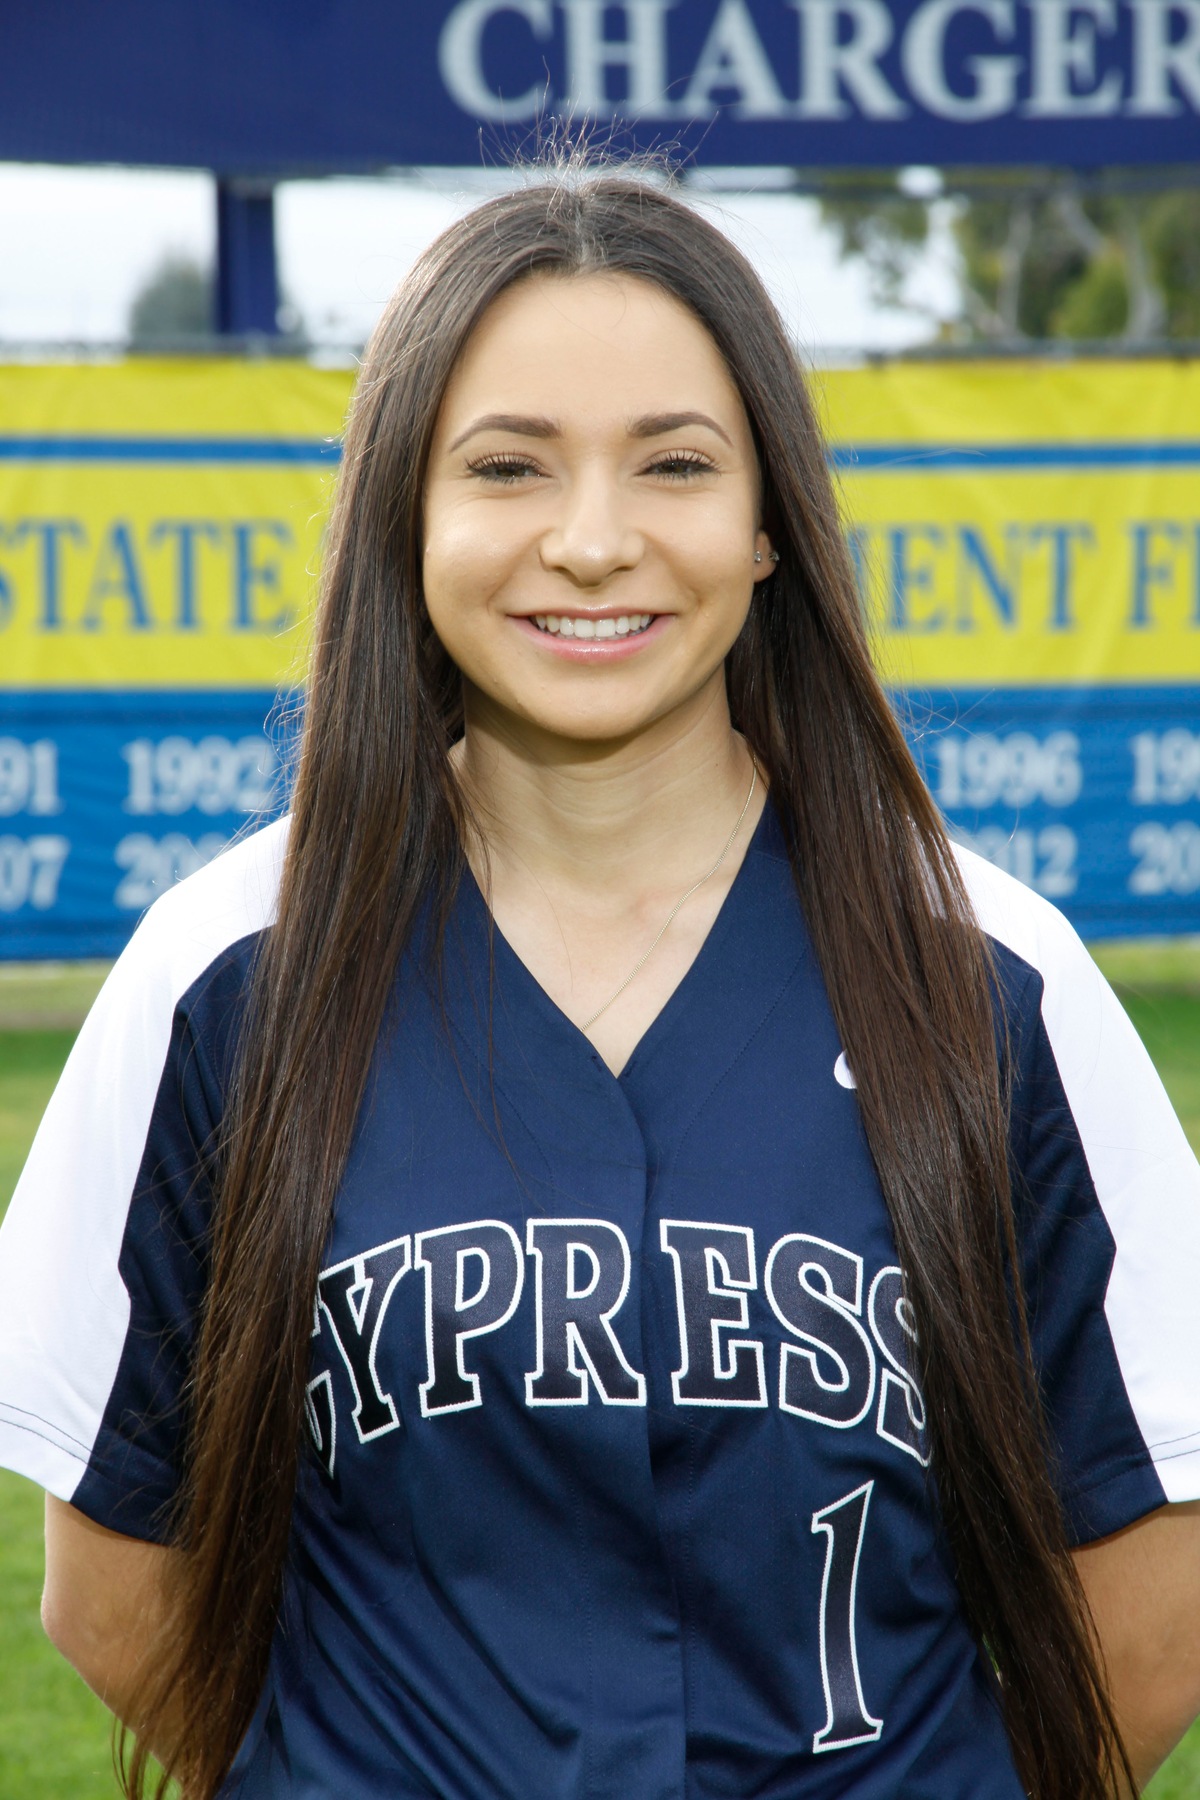 Lesley Bojorquez Earns Charger of the Week (March 25-31)